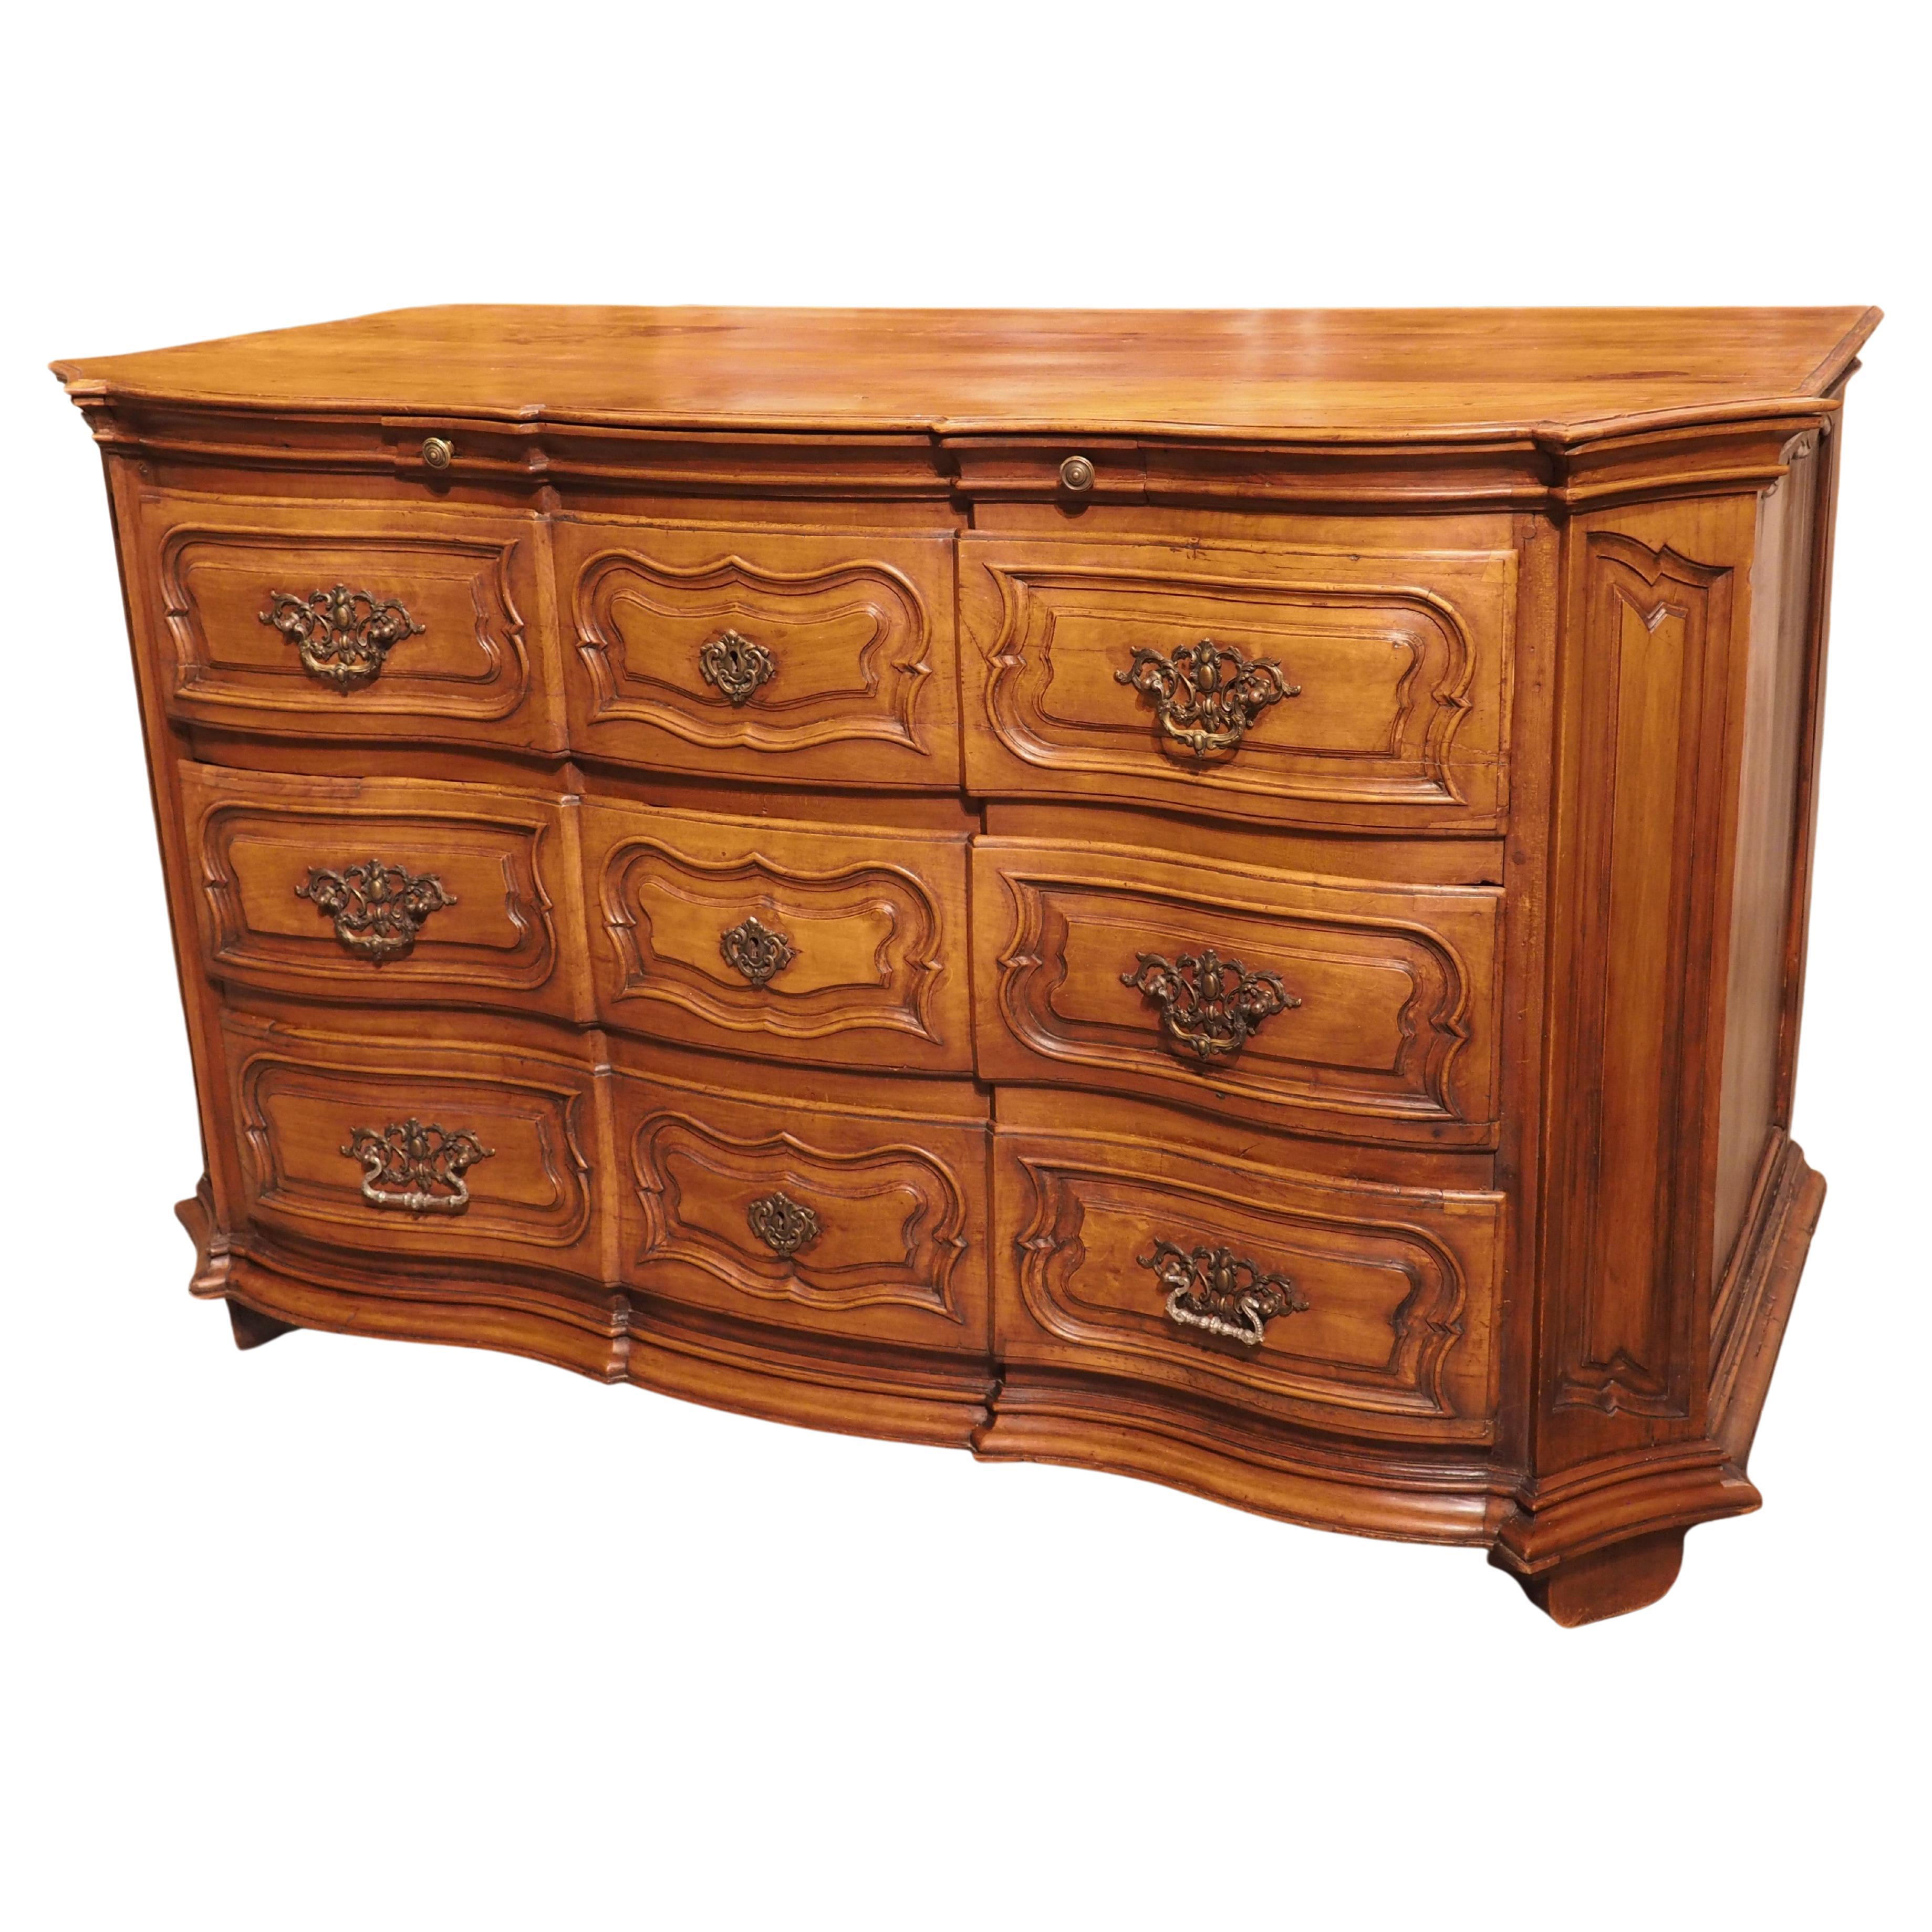 Louis XIV Cherrywood Commode from France, Early 18th Century For Sale